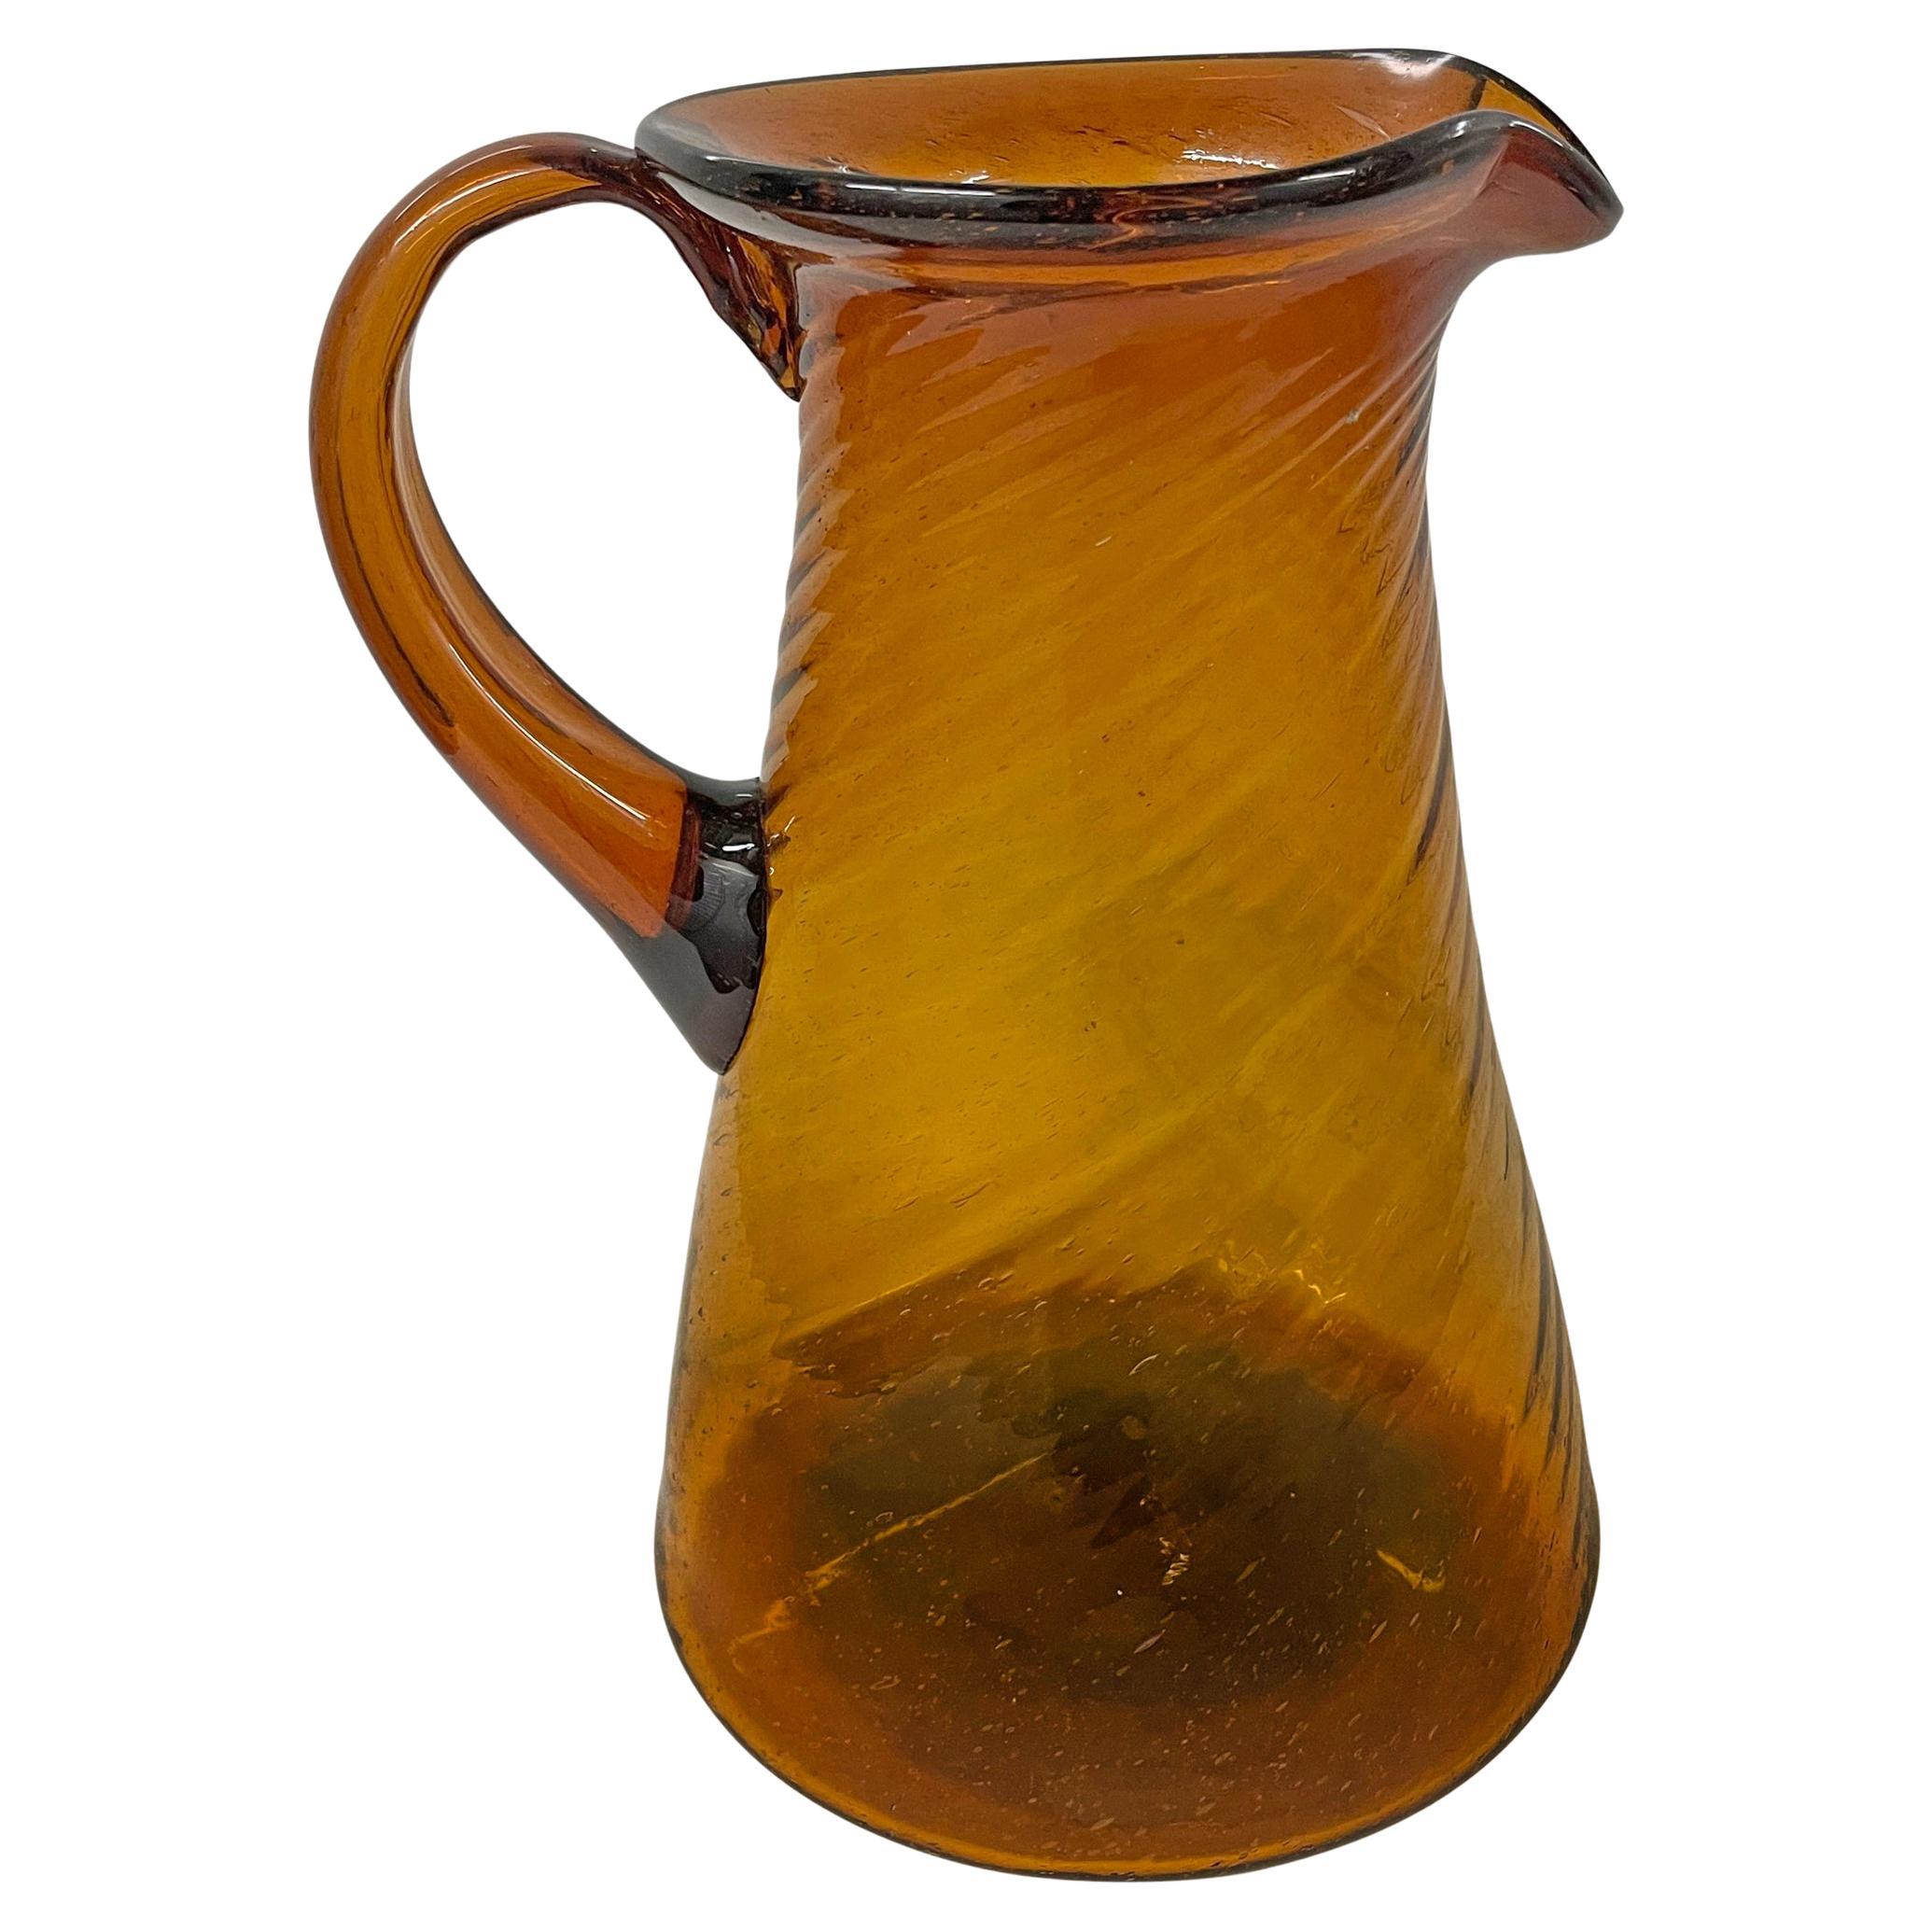 What is amber glass?